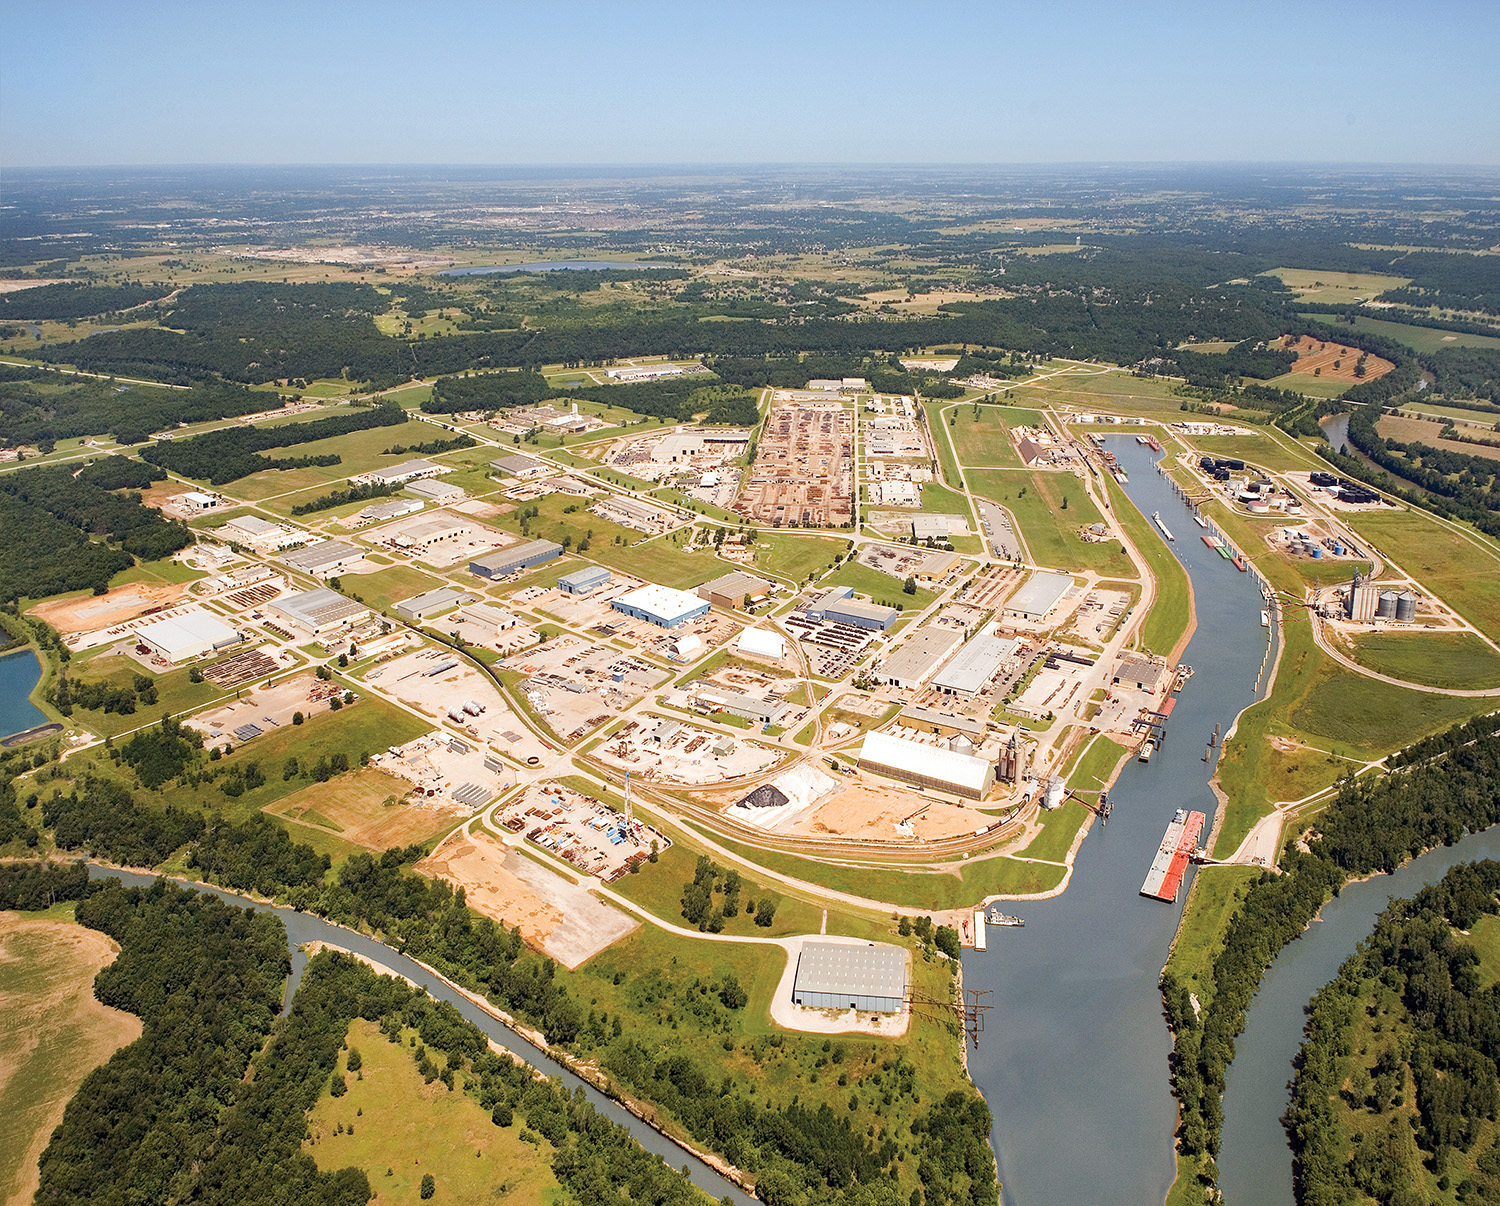 Aerial view of the Tulsa Port of Catoosa.